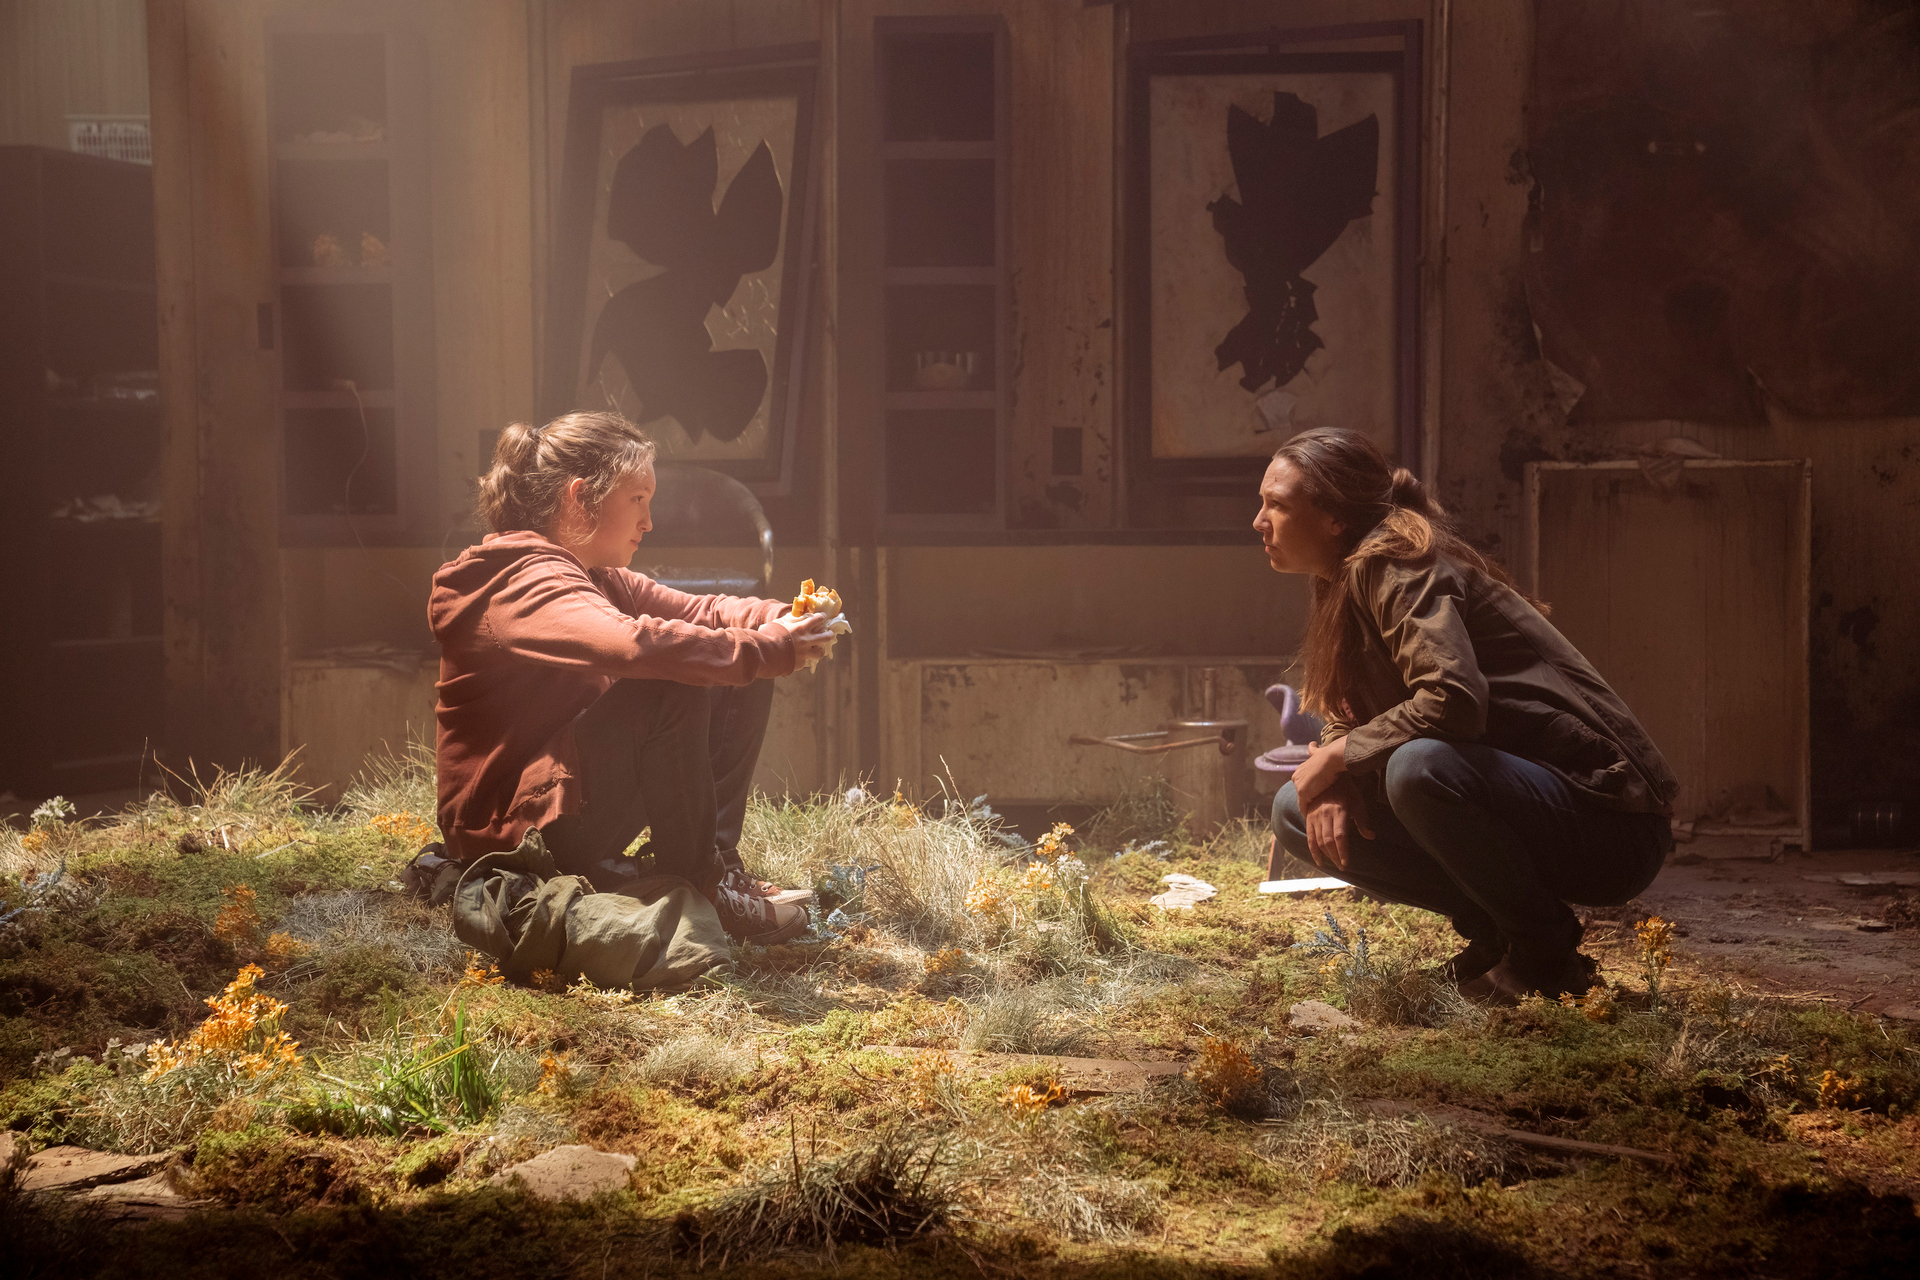 Get a glimpse of 'The Last of Us' live action series and 'The Last of